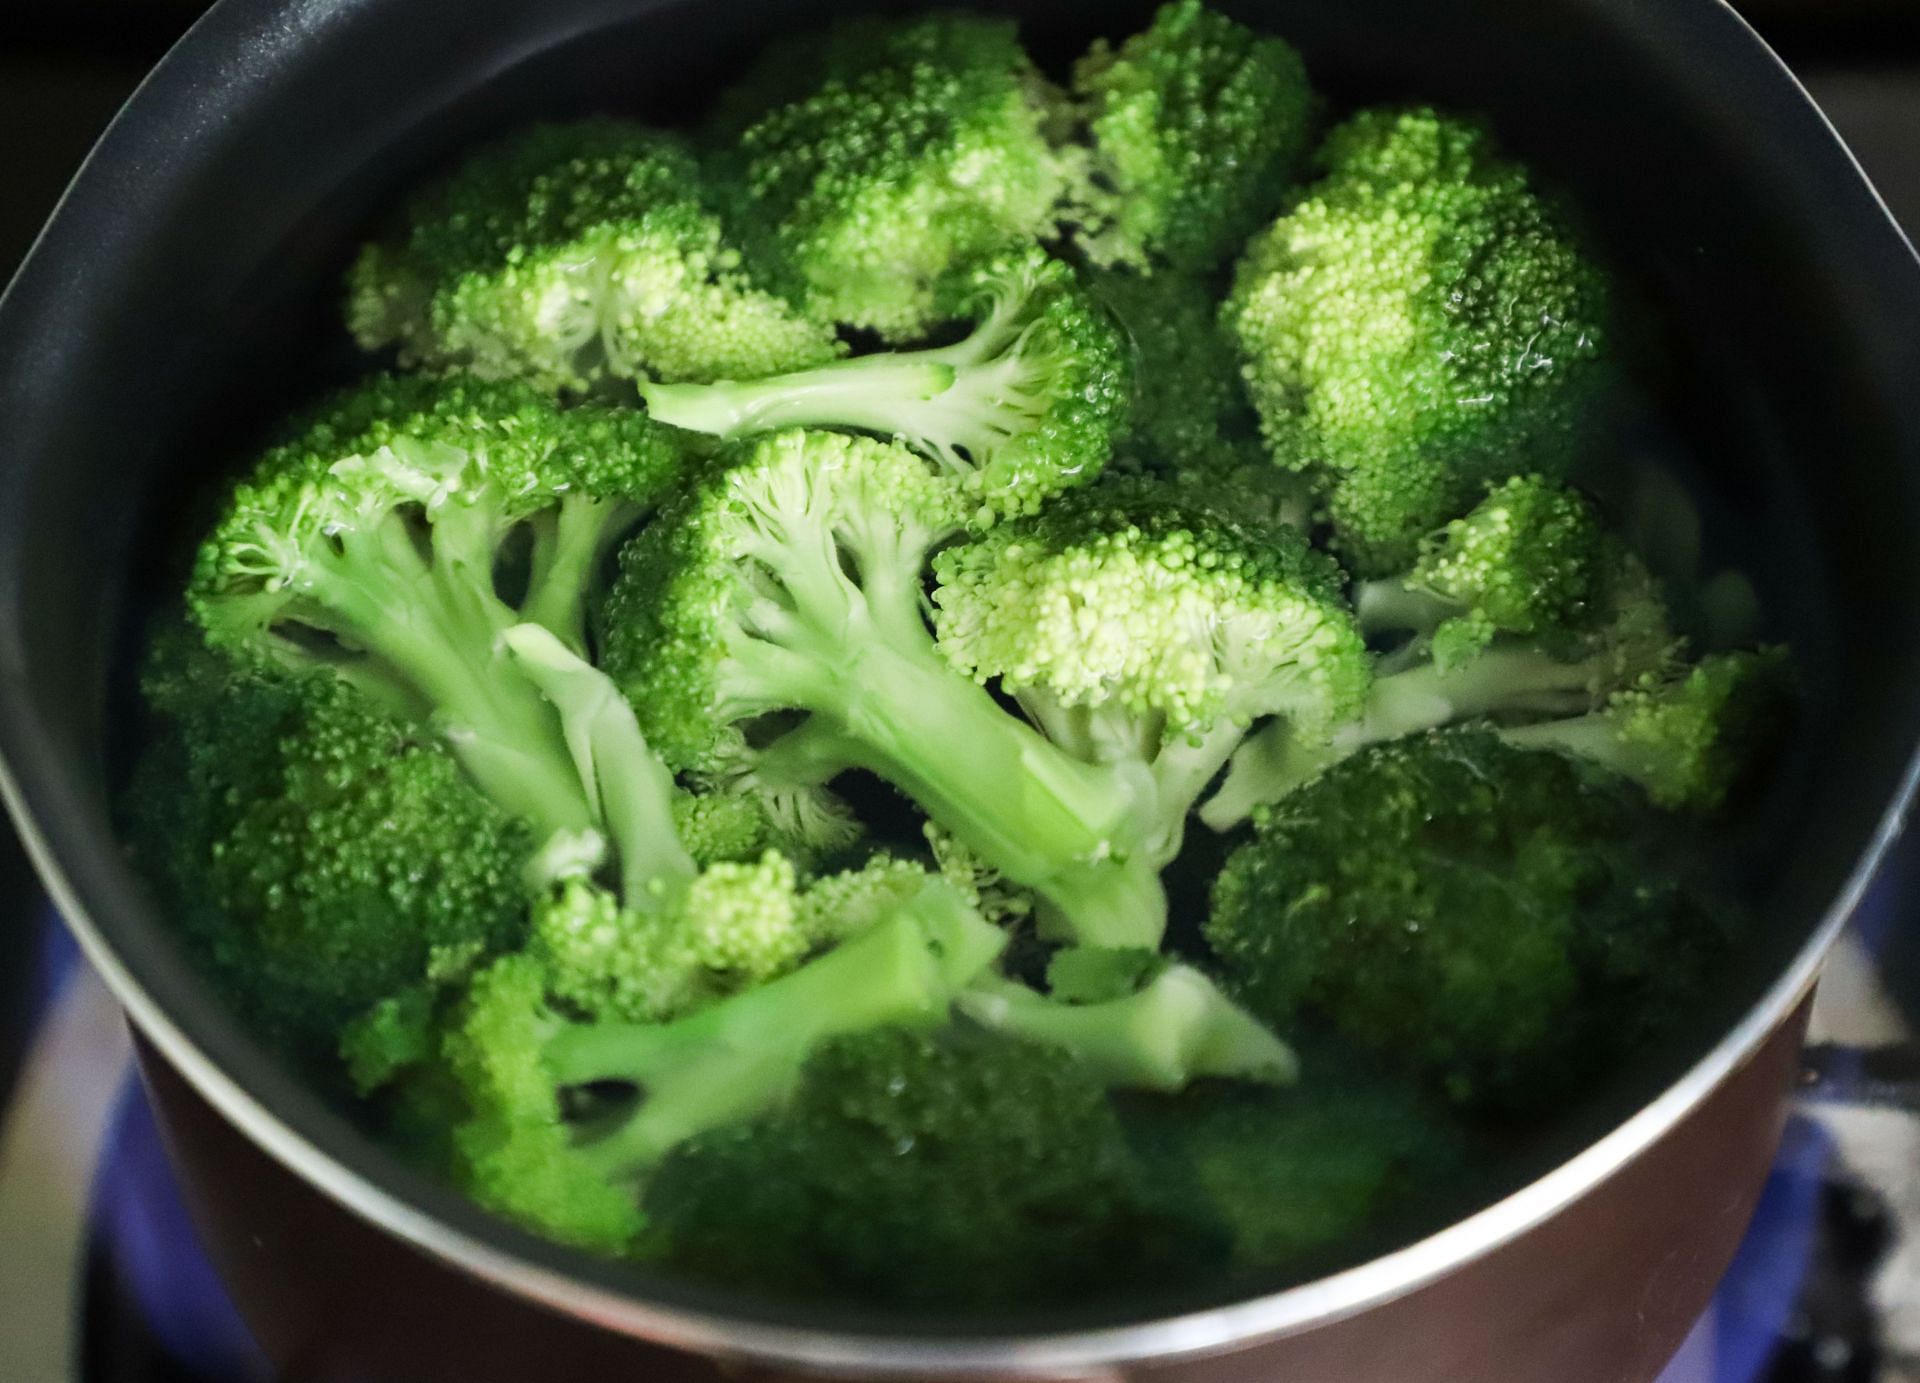 Broccoli will help you to protect against cancer cells. (Image via Pexels / Cats Coming)